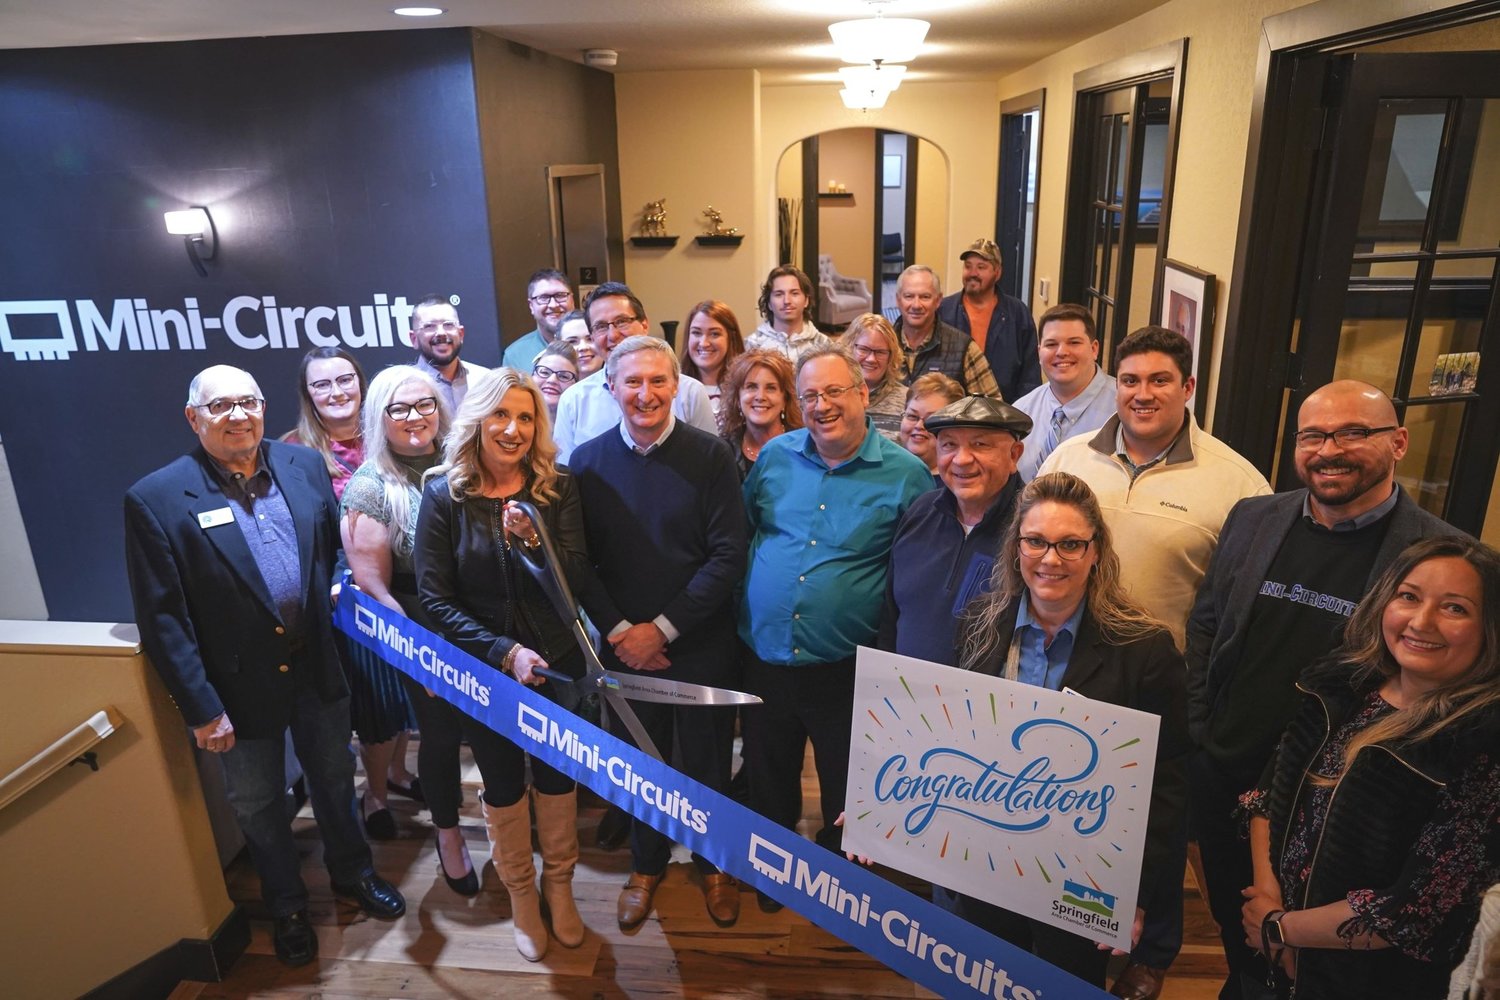 The Springfield Area Chamber of Commerce last month held a ribbon-cutting ceremony for Mini-Circuits' new office.